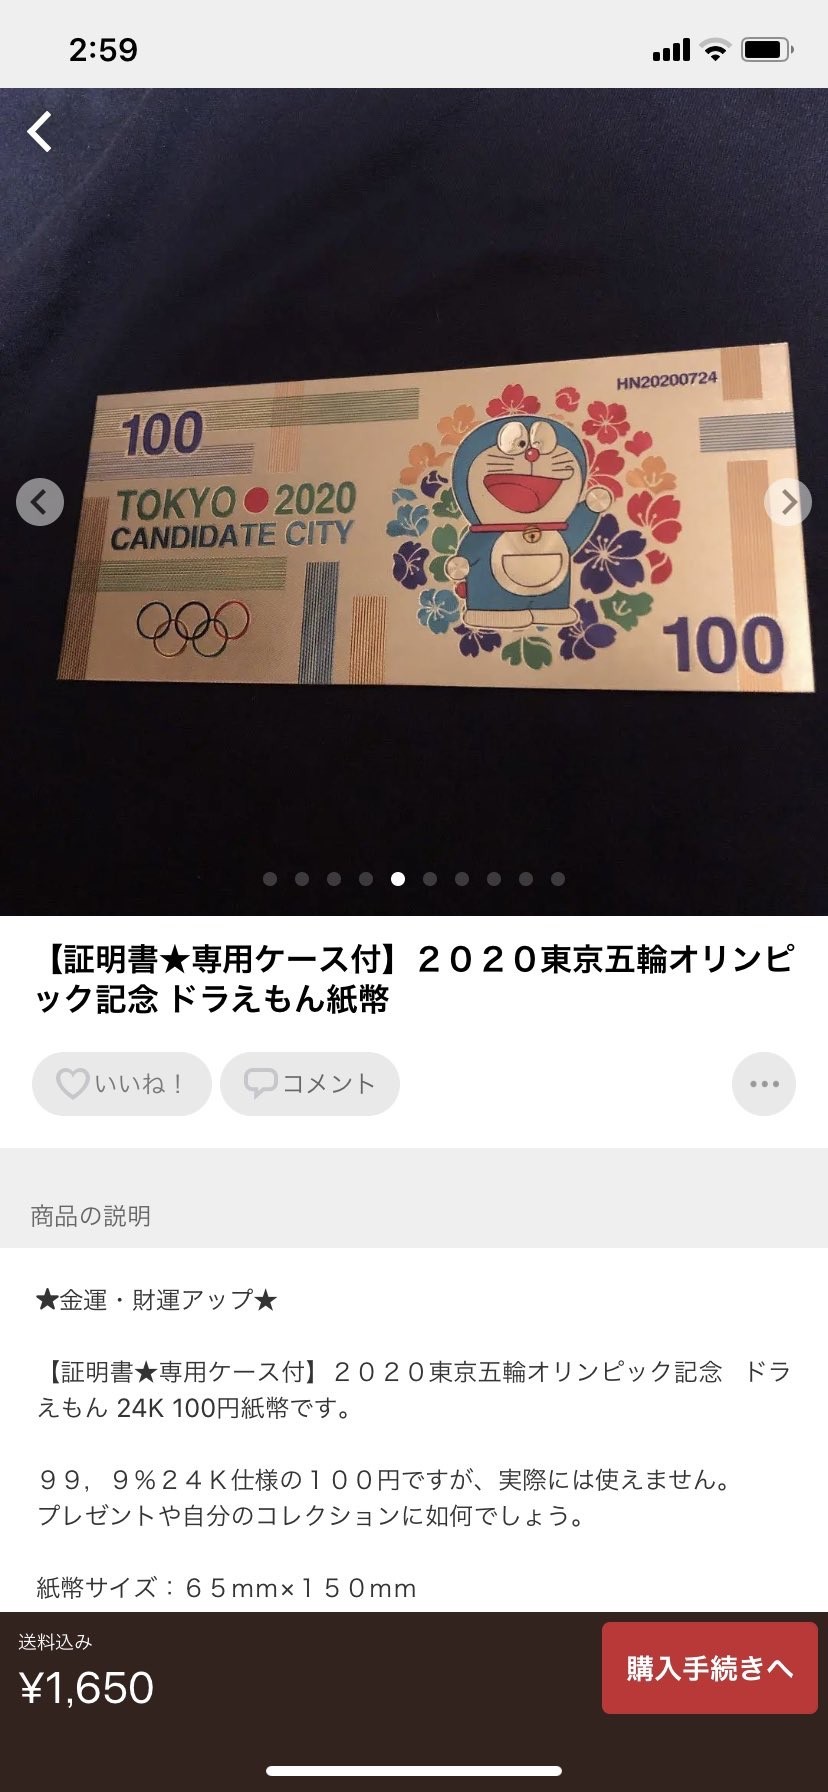 [Sad news] Doraemon will be used for fake Olympic banknotes that are too smelly